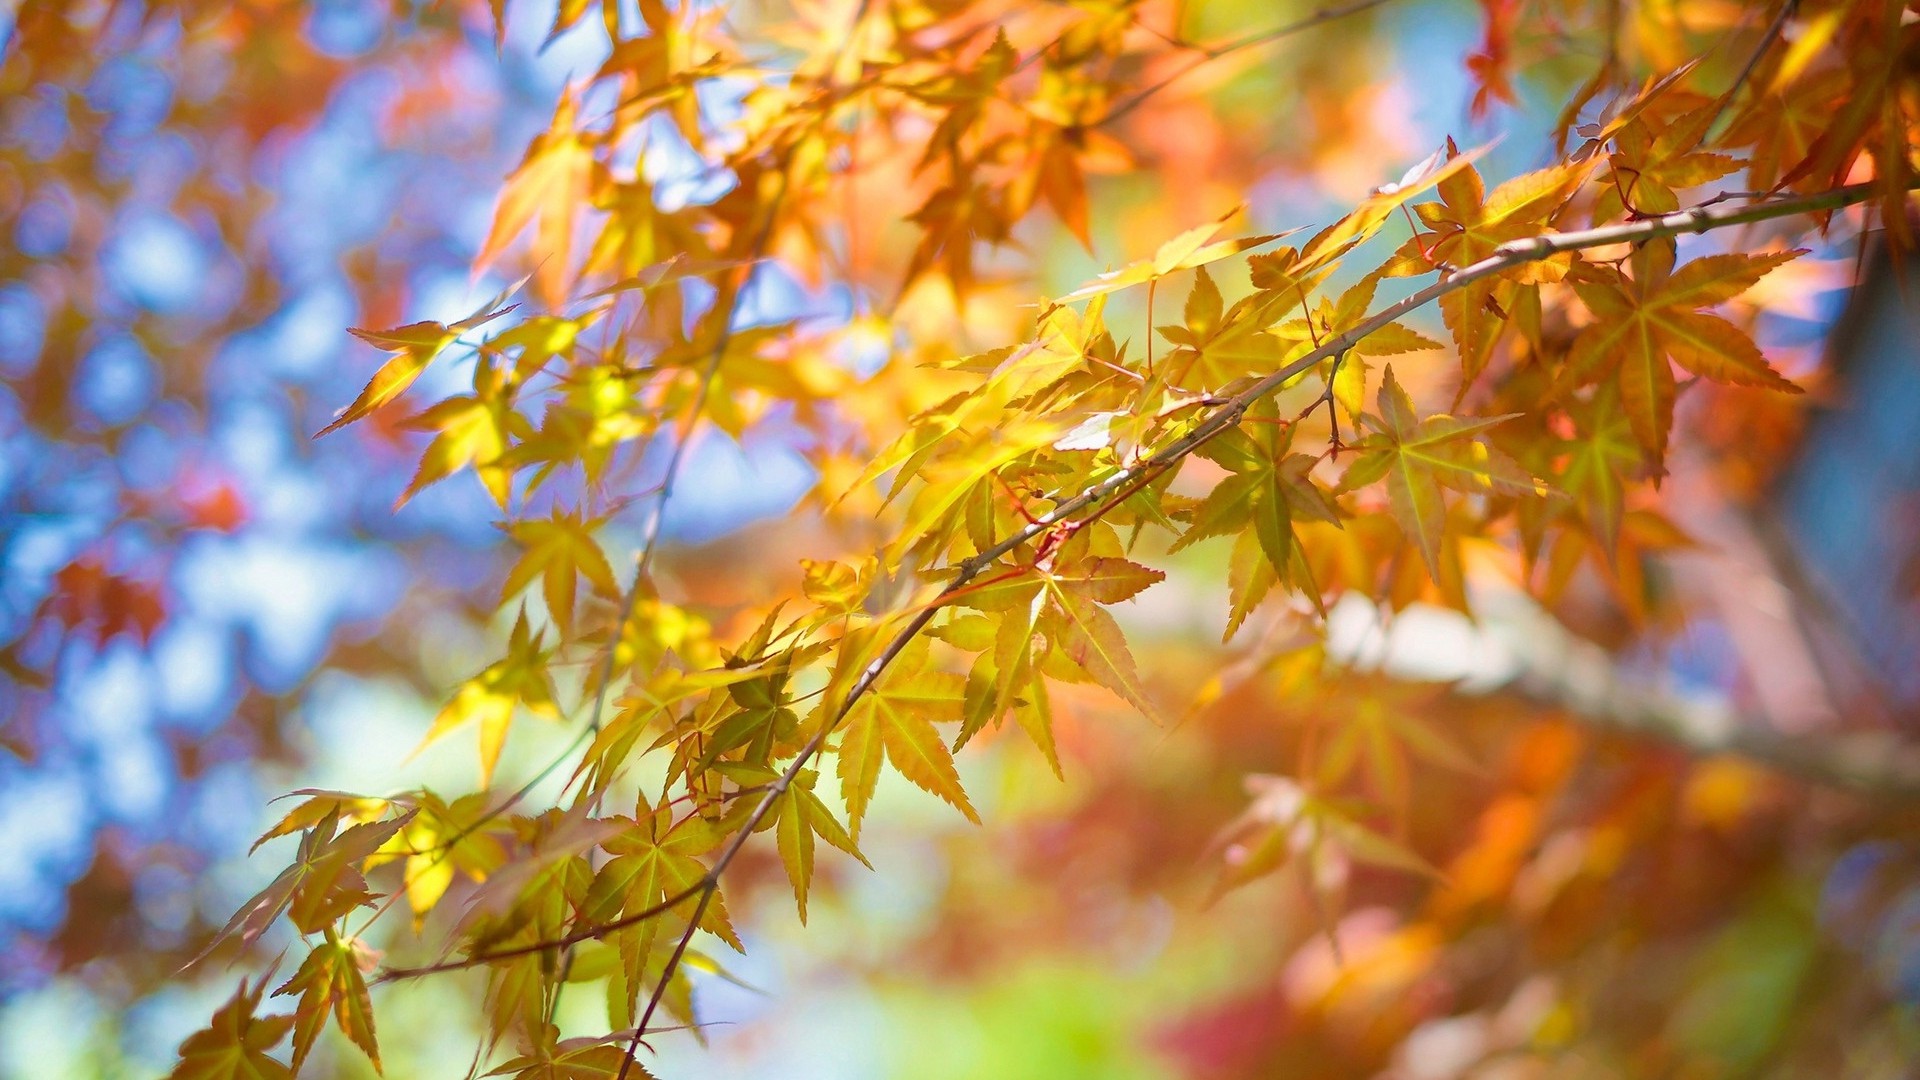 1920x1080 wallpapers: leaves, autumn, tree, branch (image)